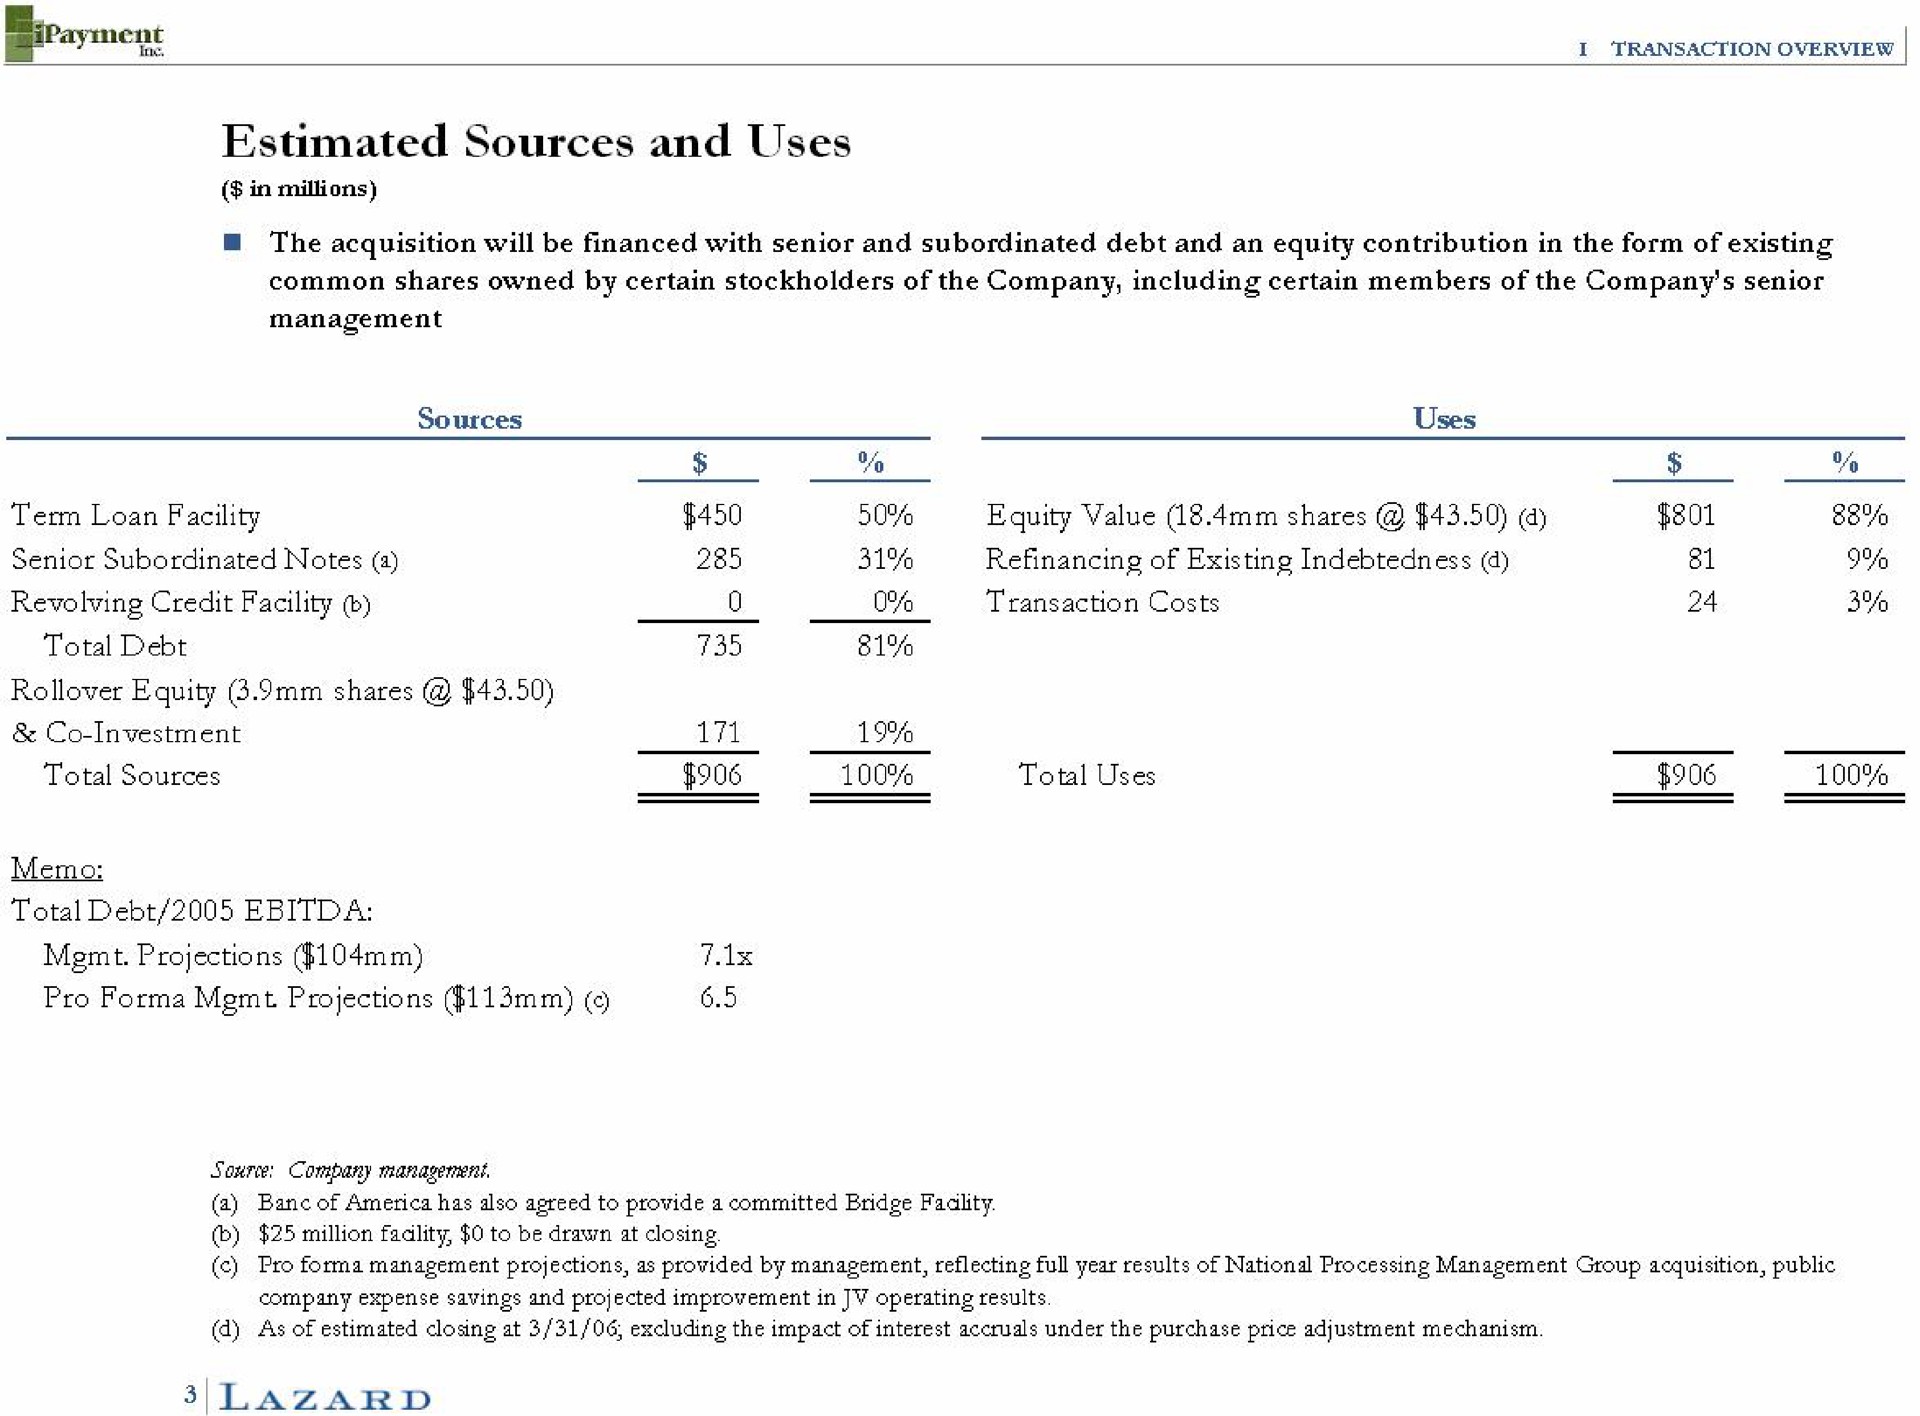 estimated sources and uses term loan facility equity shares equity value shares a | Lazard